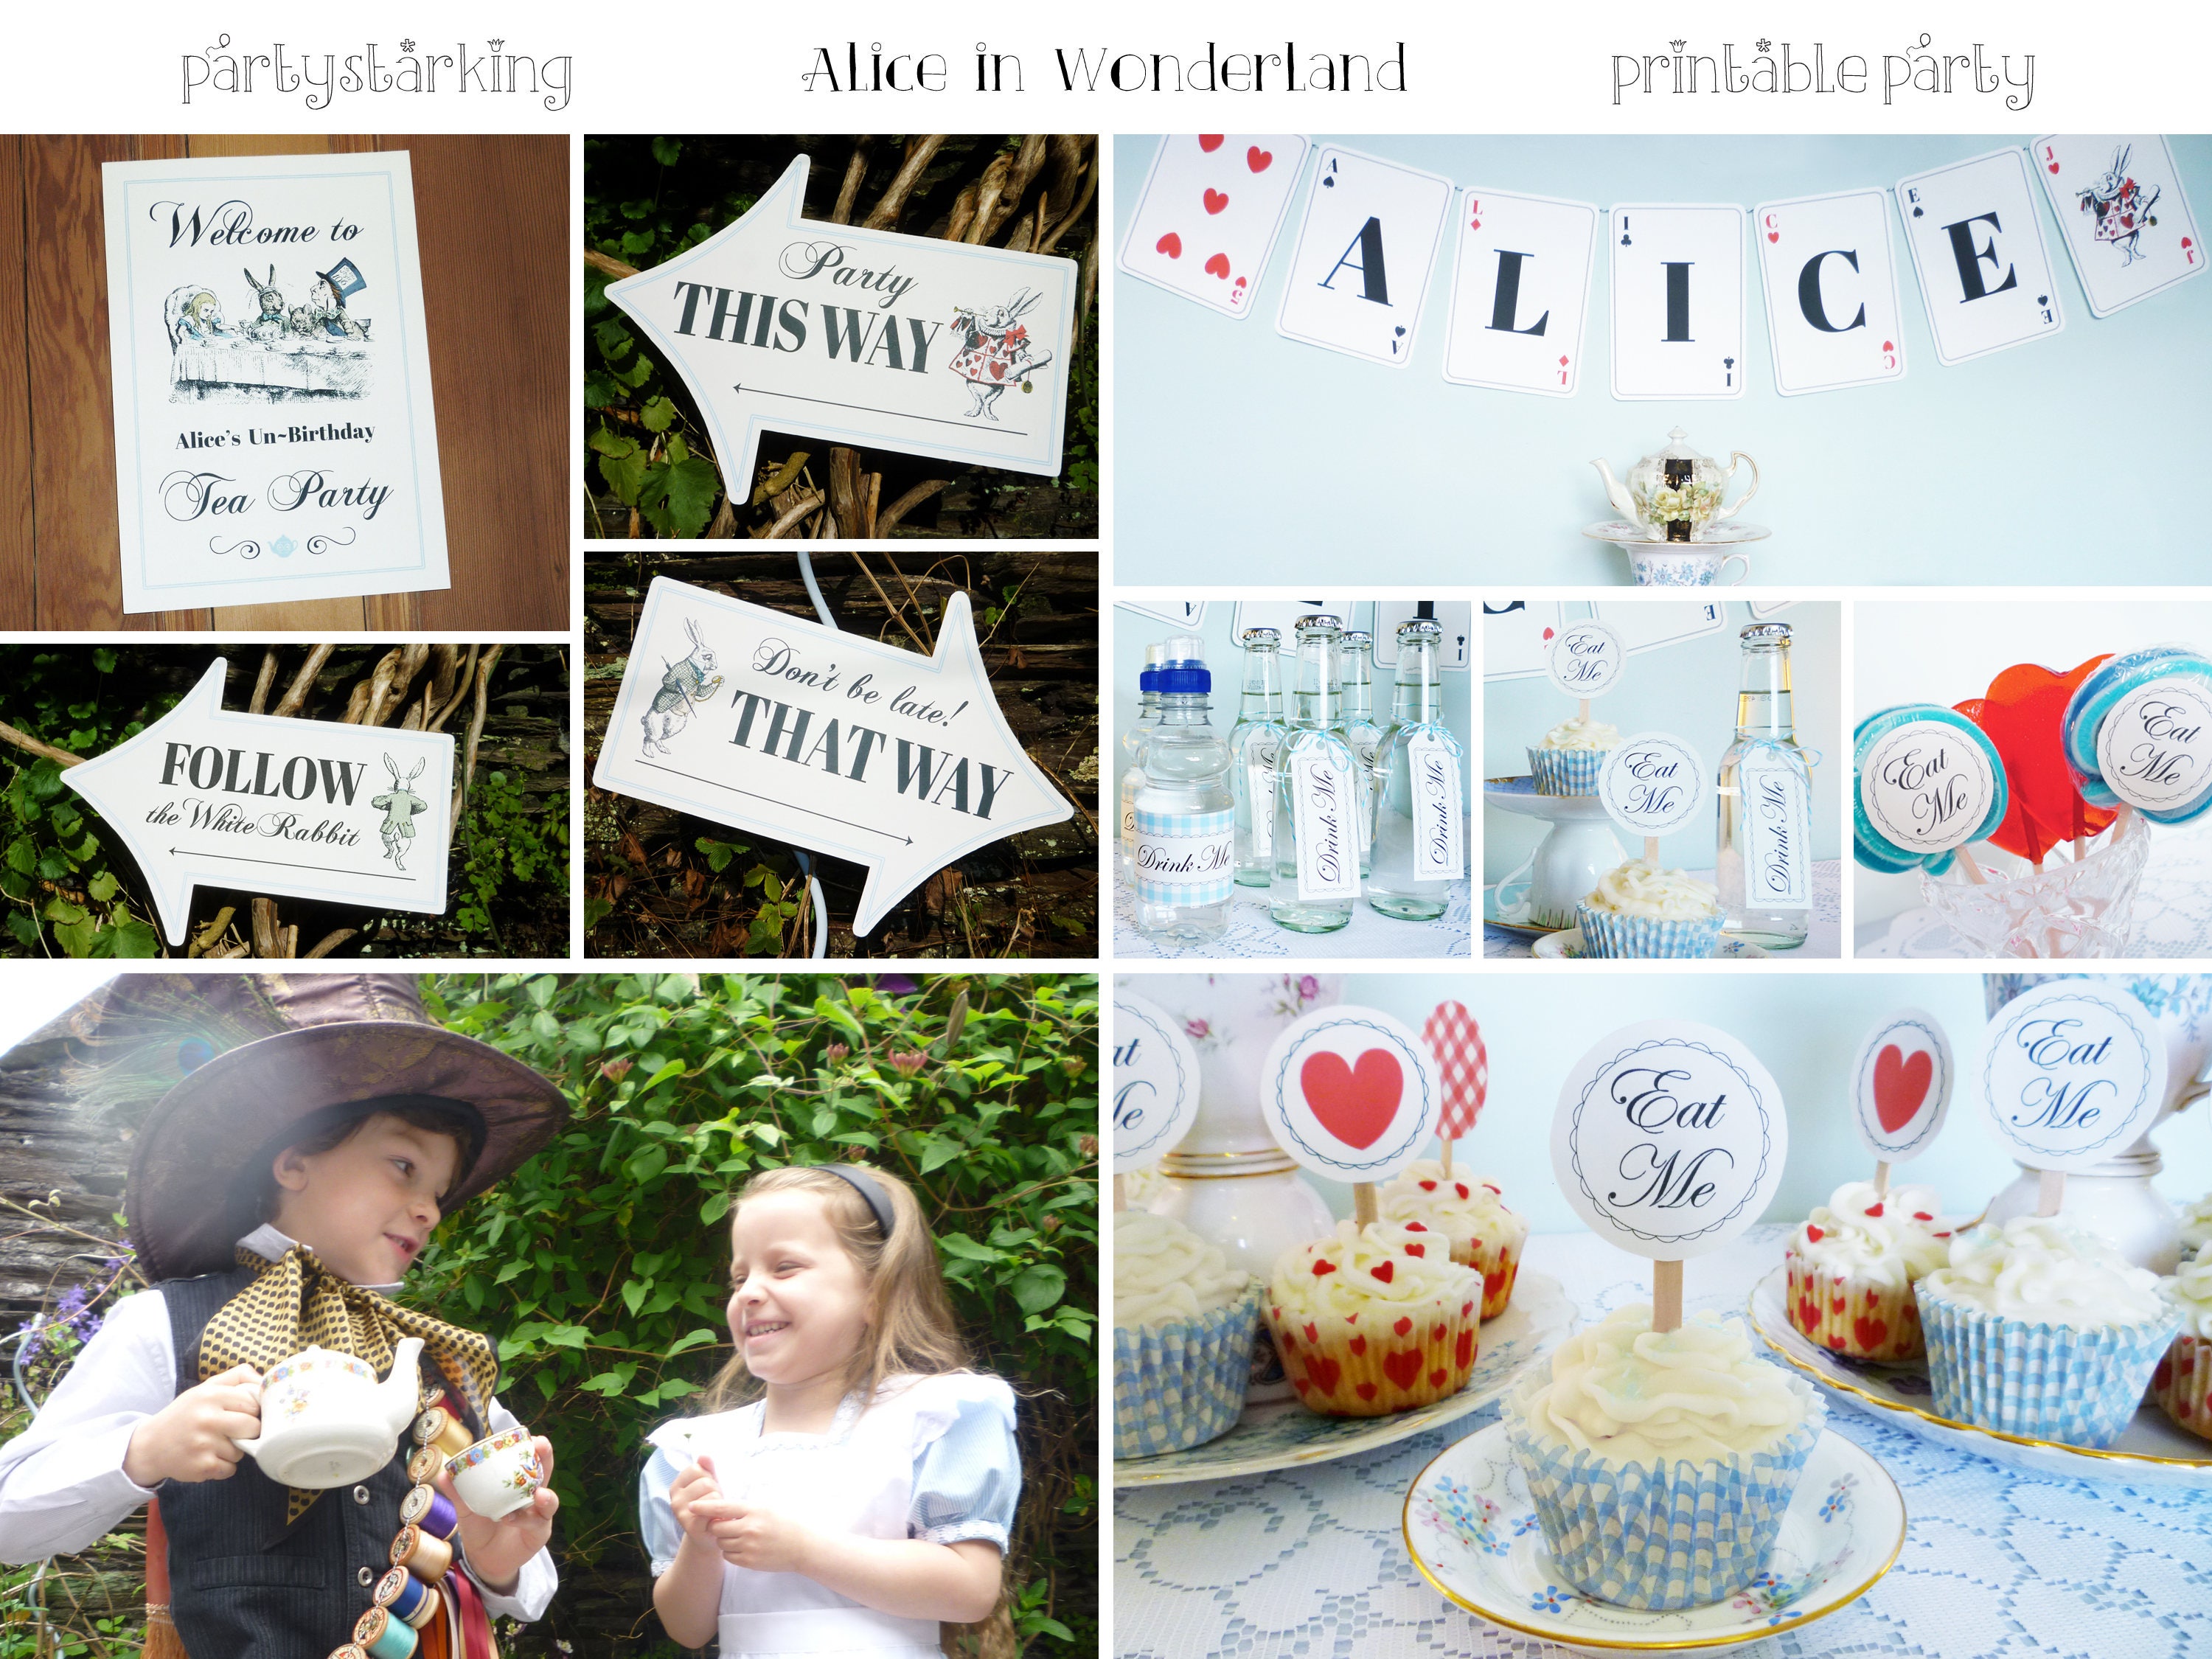 Shabby Chic Alice In Wonderland Birthday Party – More Ideas Added!